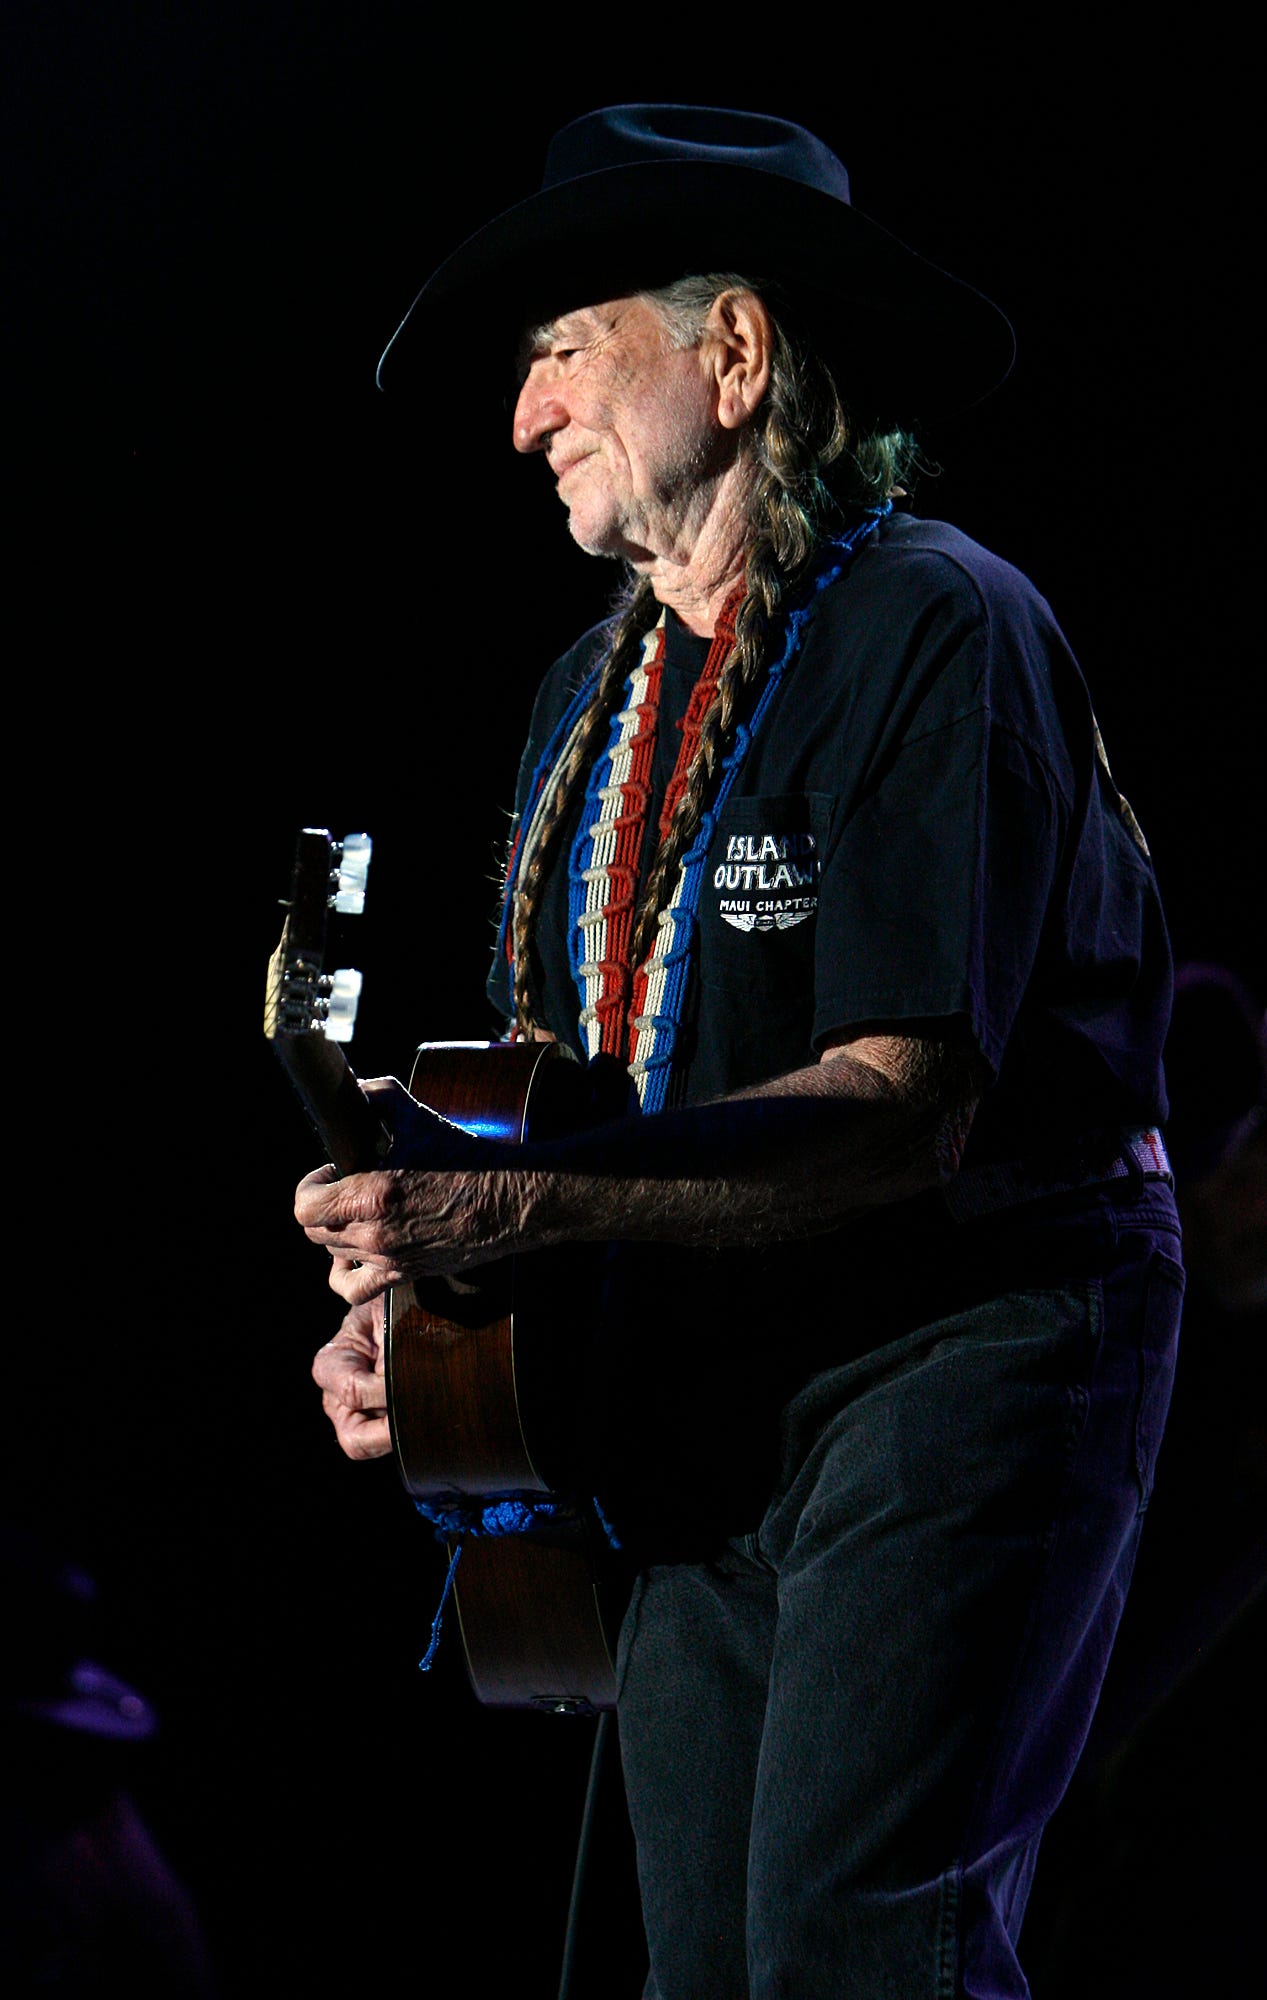 Willie Nelson performs at the final show at The Backyard on Sunday, October 26, 2008.